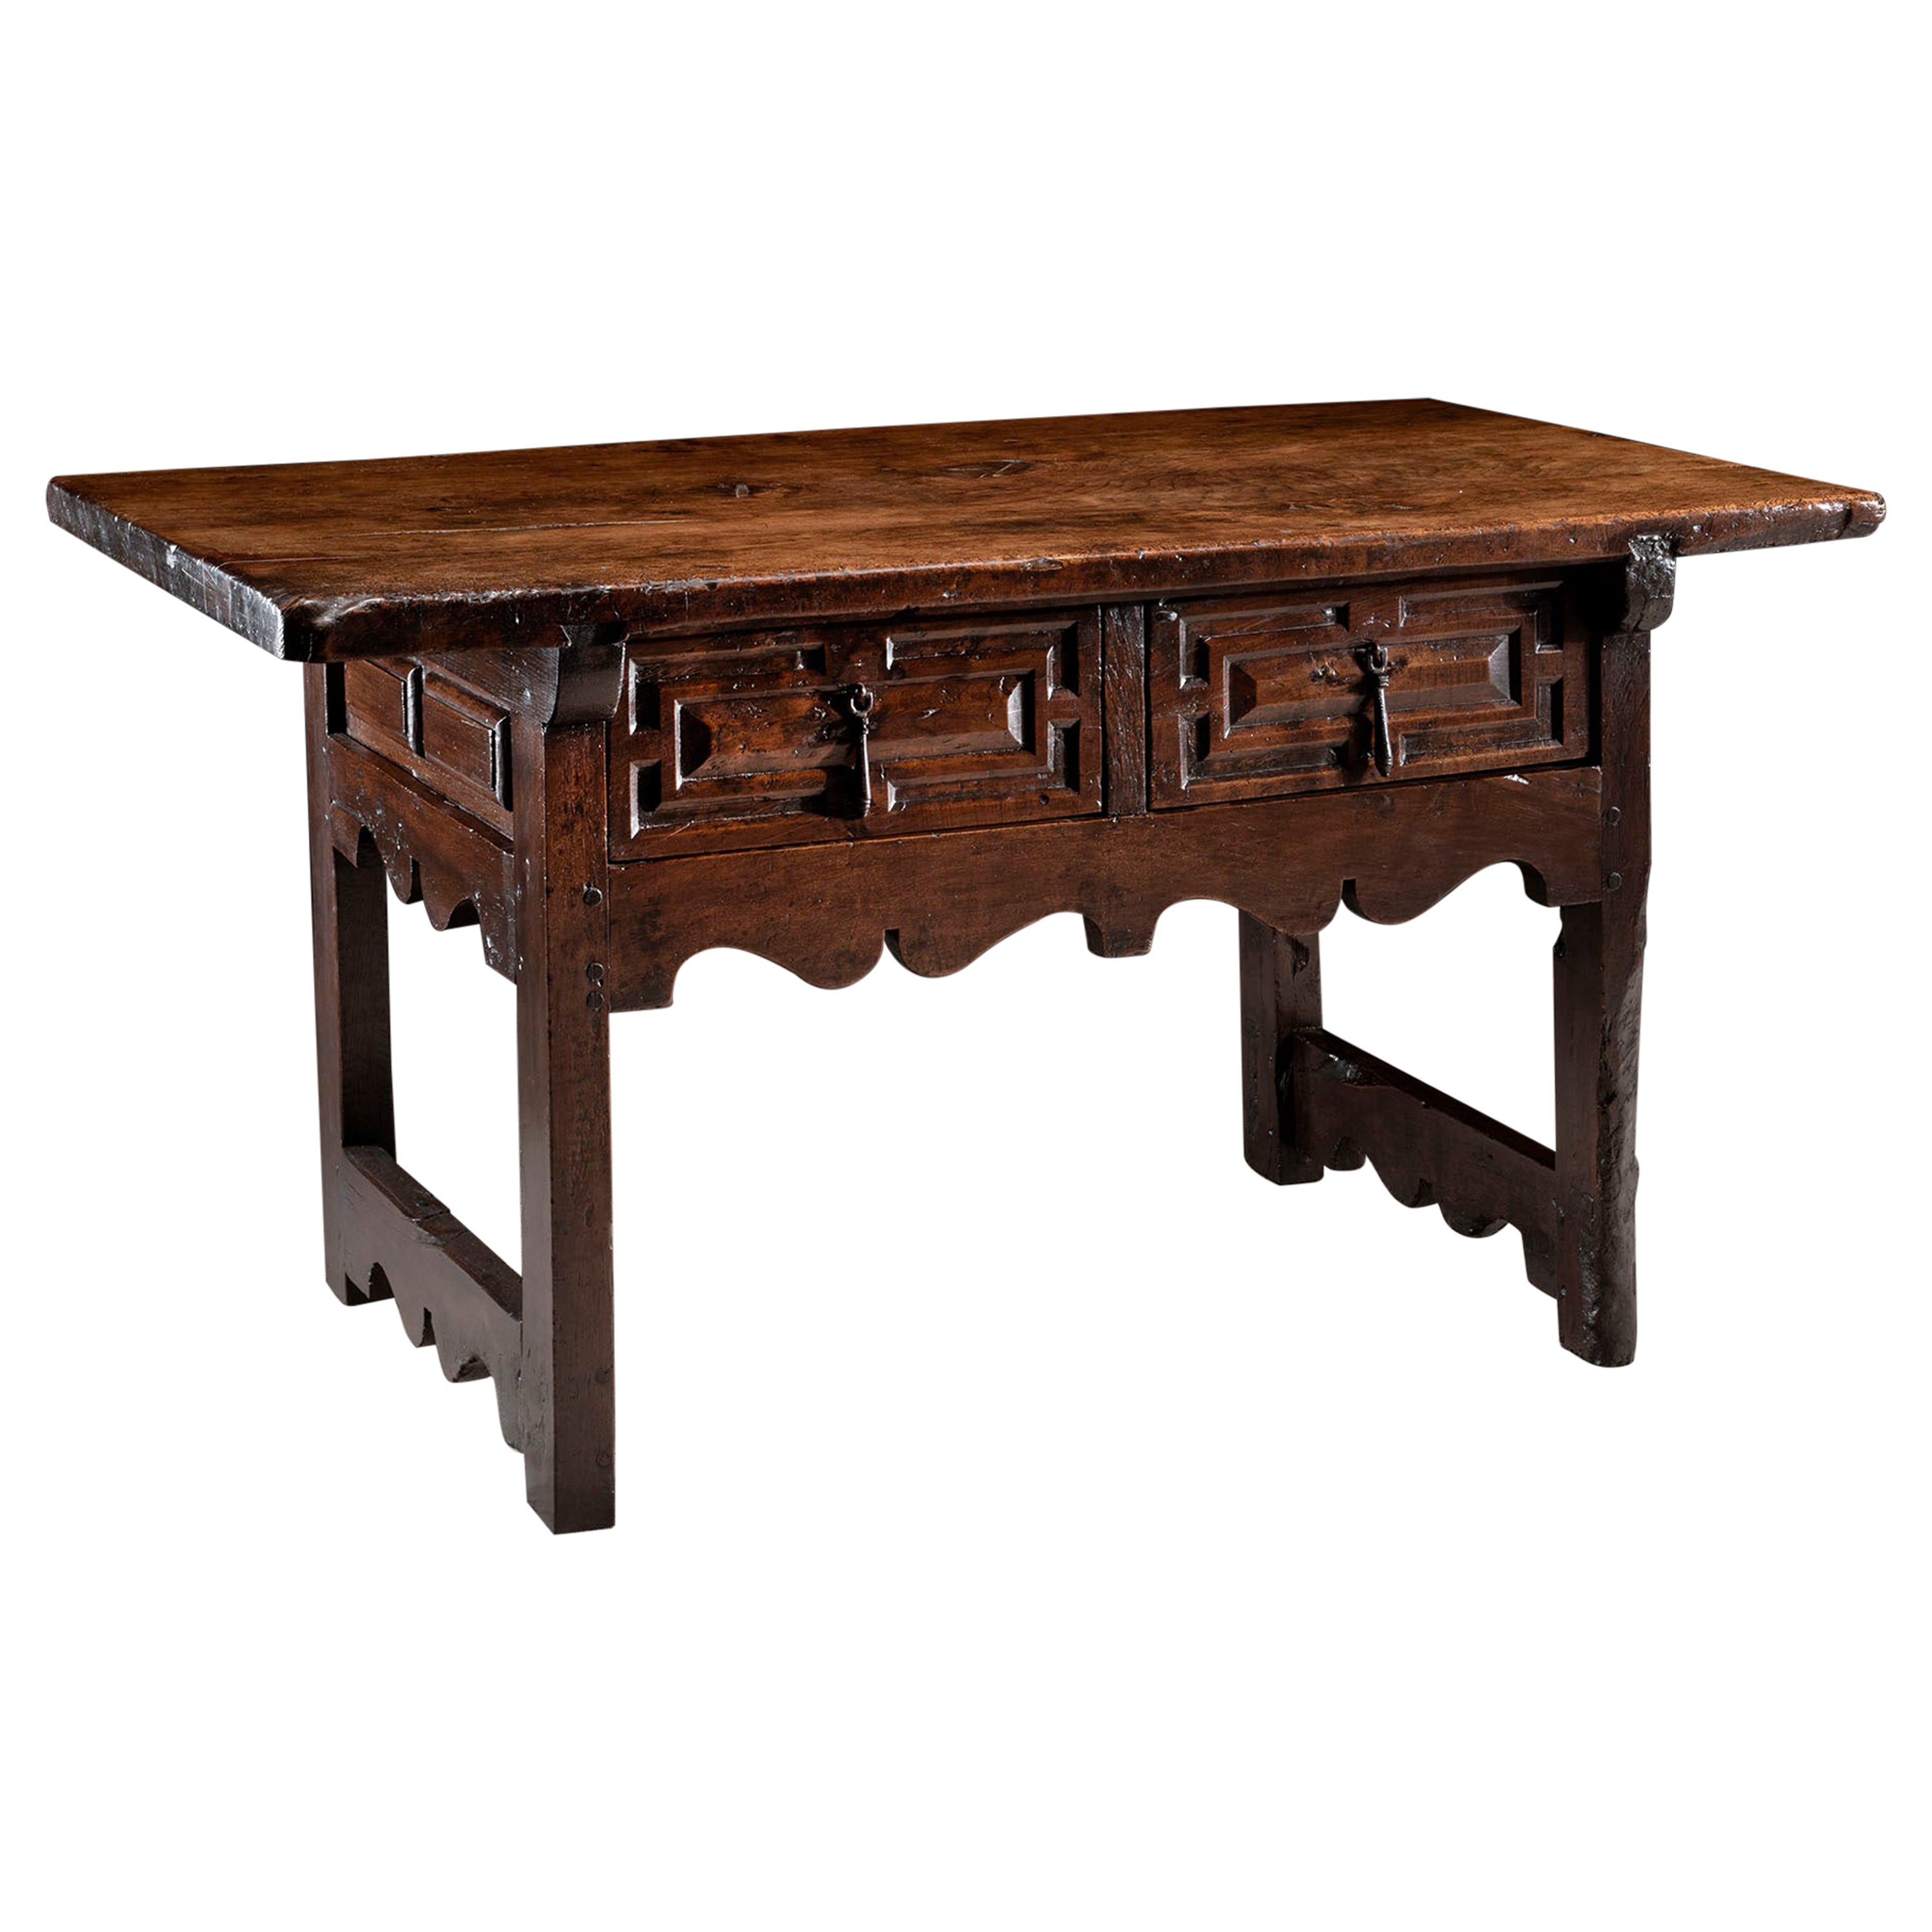 Table Rent Center Writing Desk Spanish Top 1 plank Chestnut Iron Handles L56" For Sale